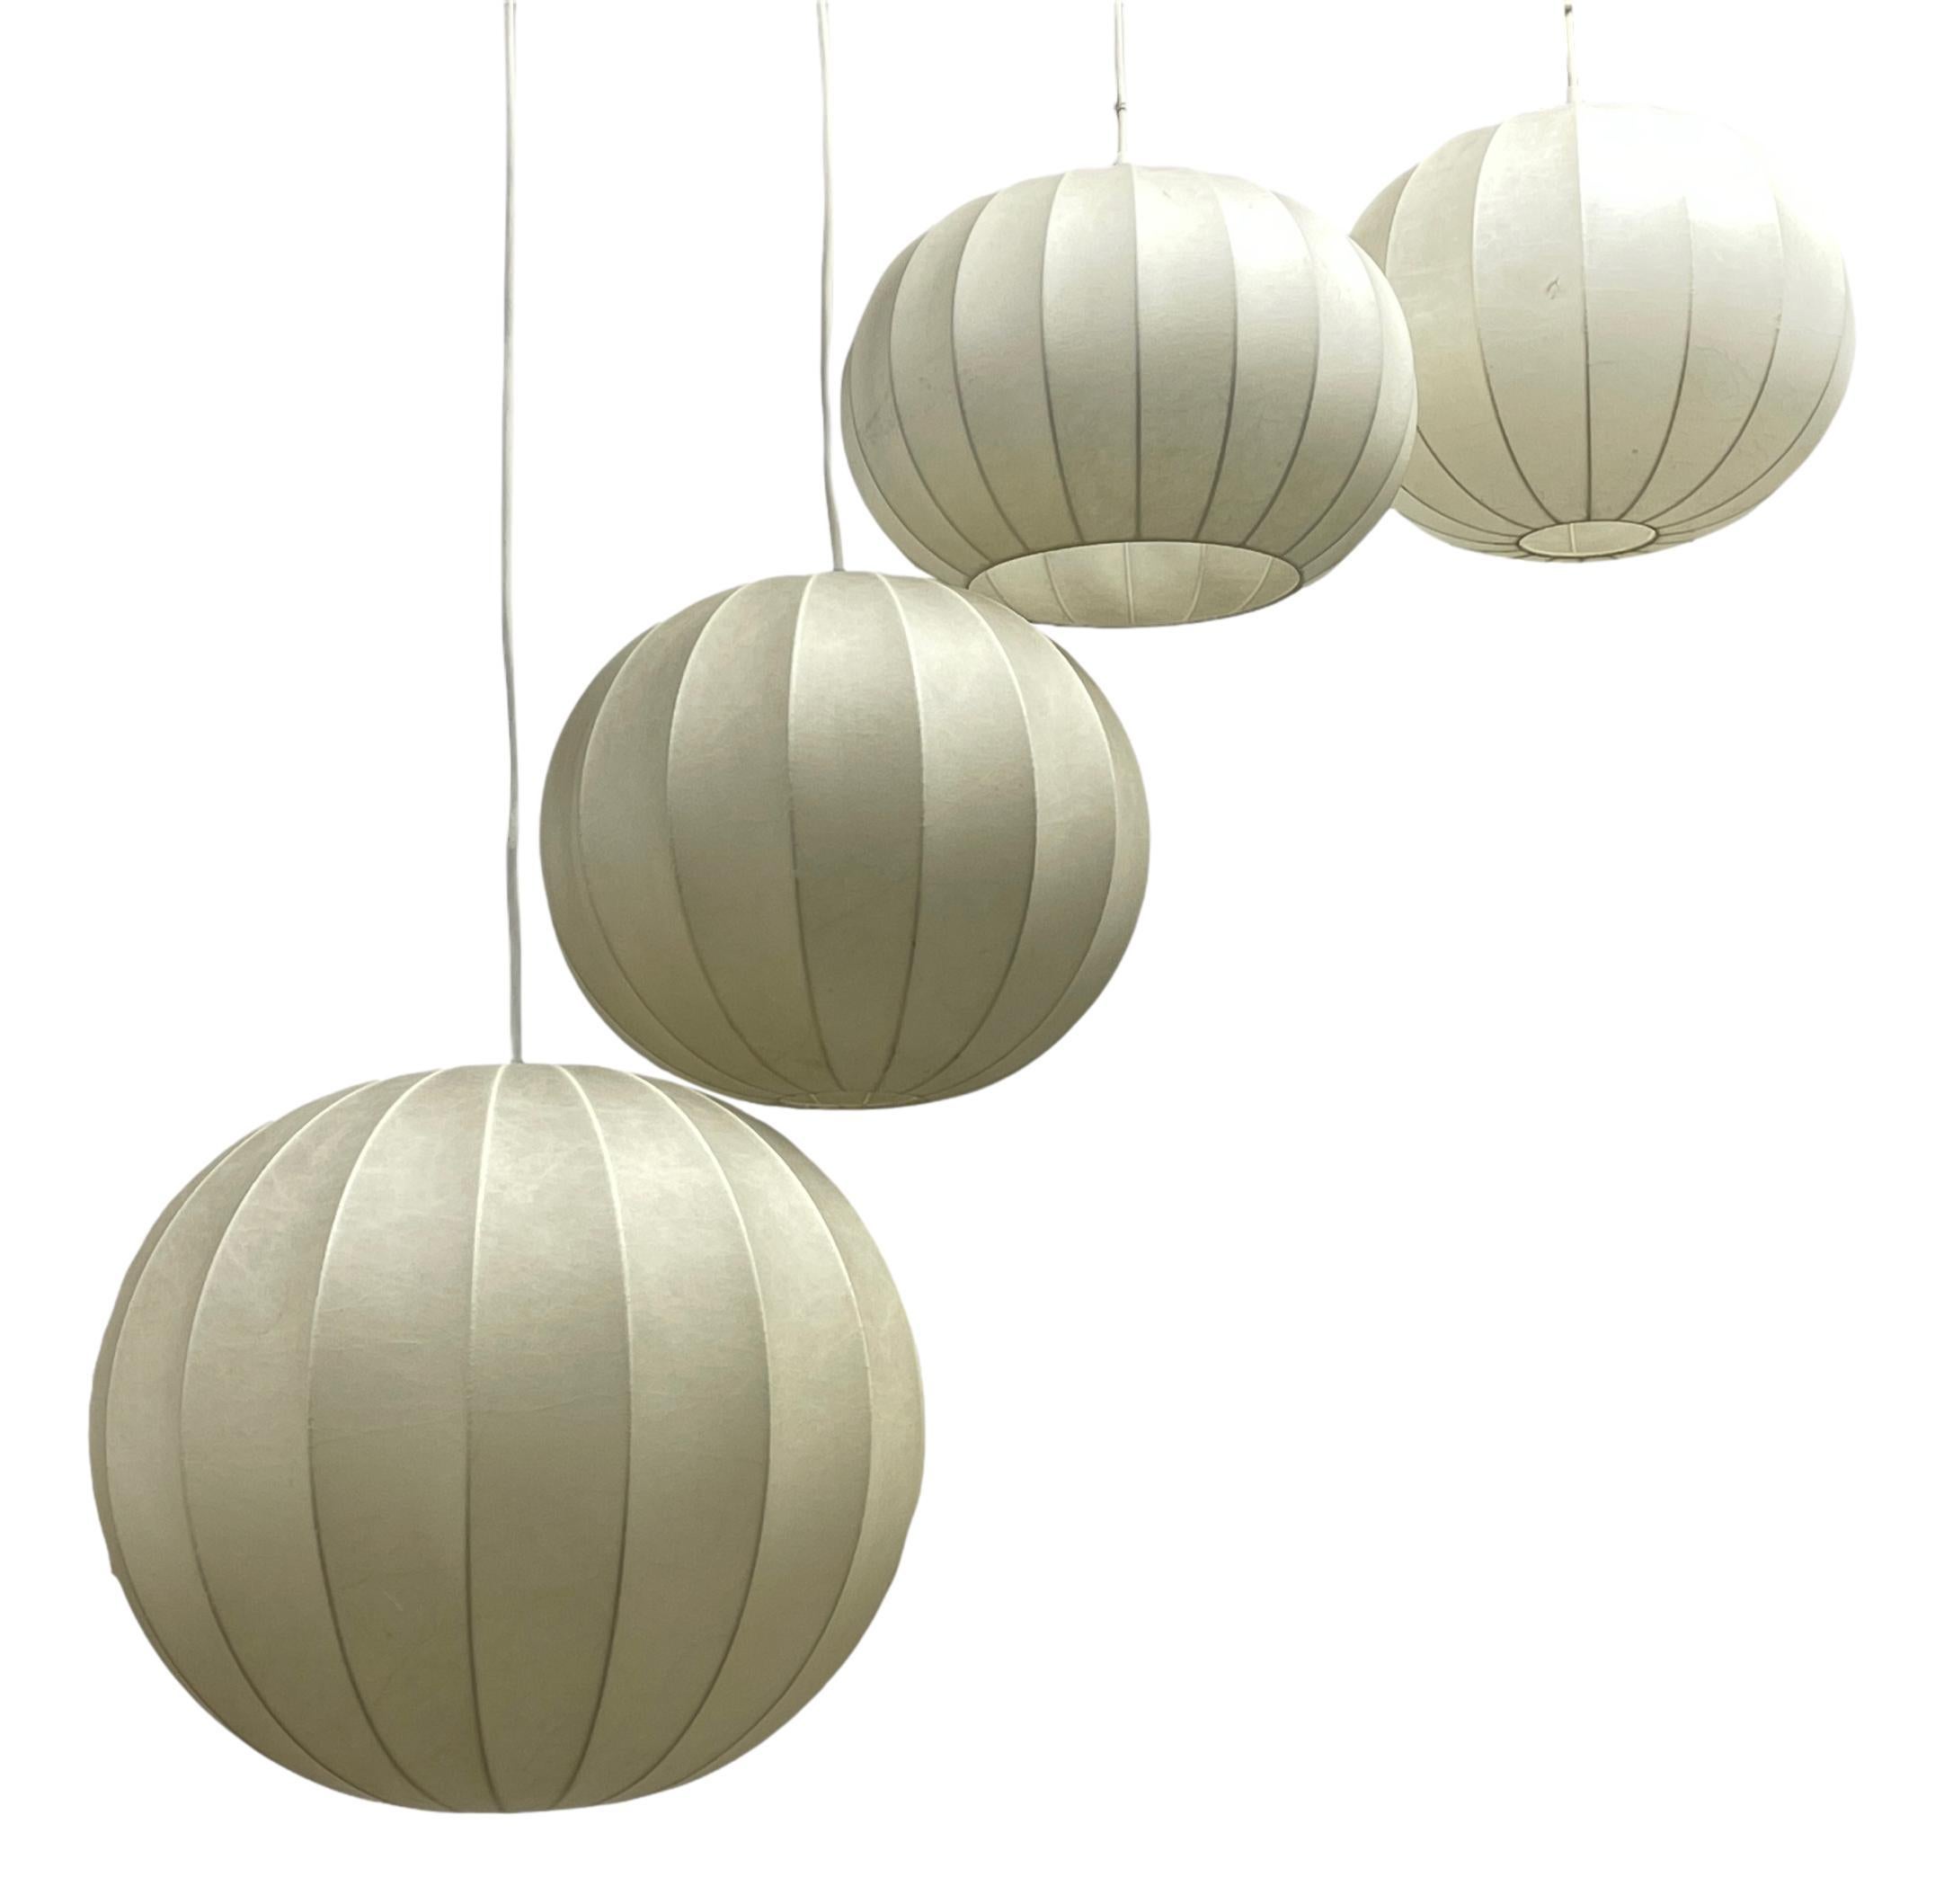 A lot of four cocoon hanging lamps made in Italy in the 1960s. Each has a beautiful round ball design, which is similar to the lamps made by Castiglioni. Biggest Ball is approx. 16